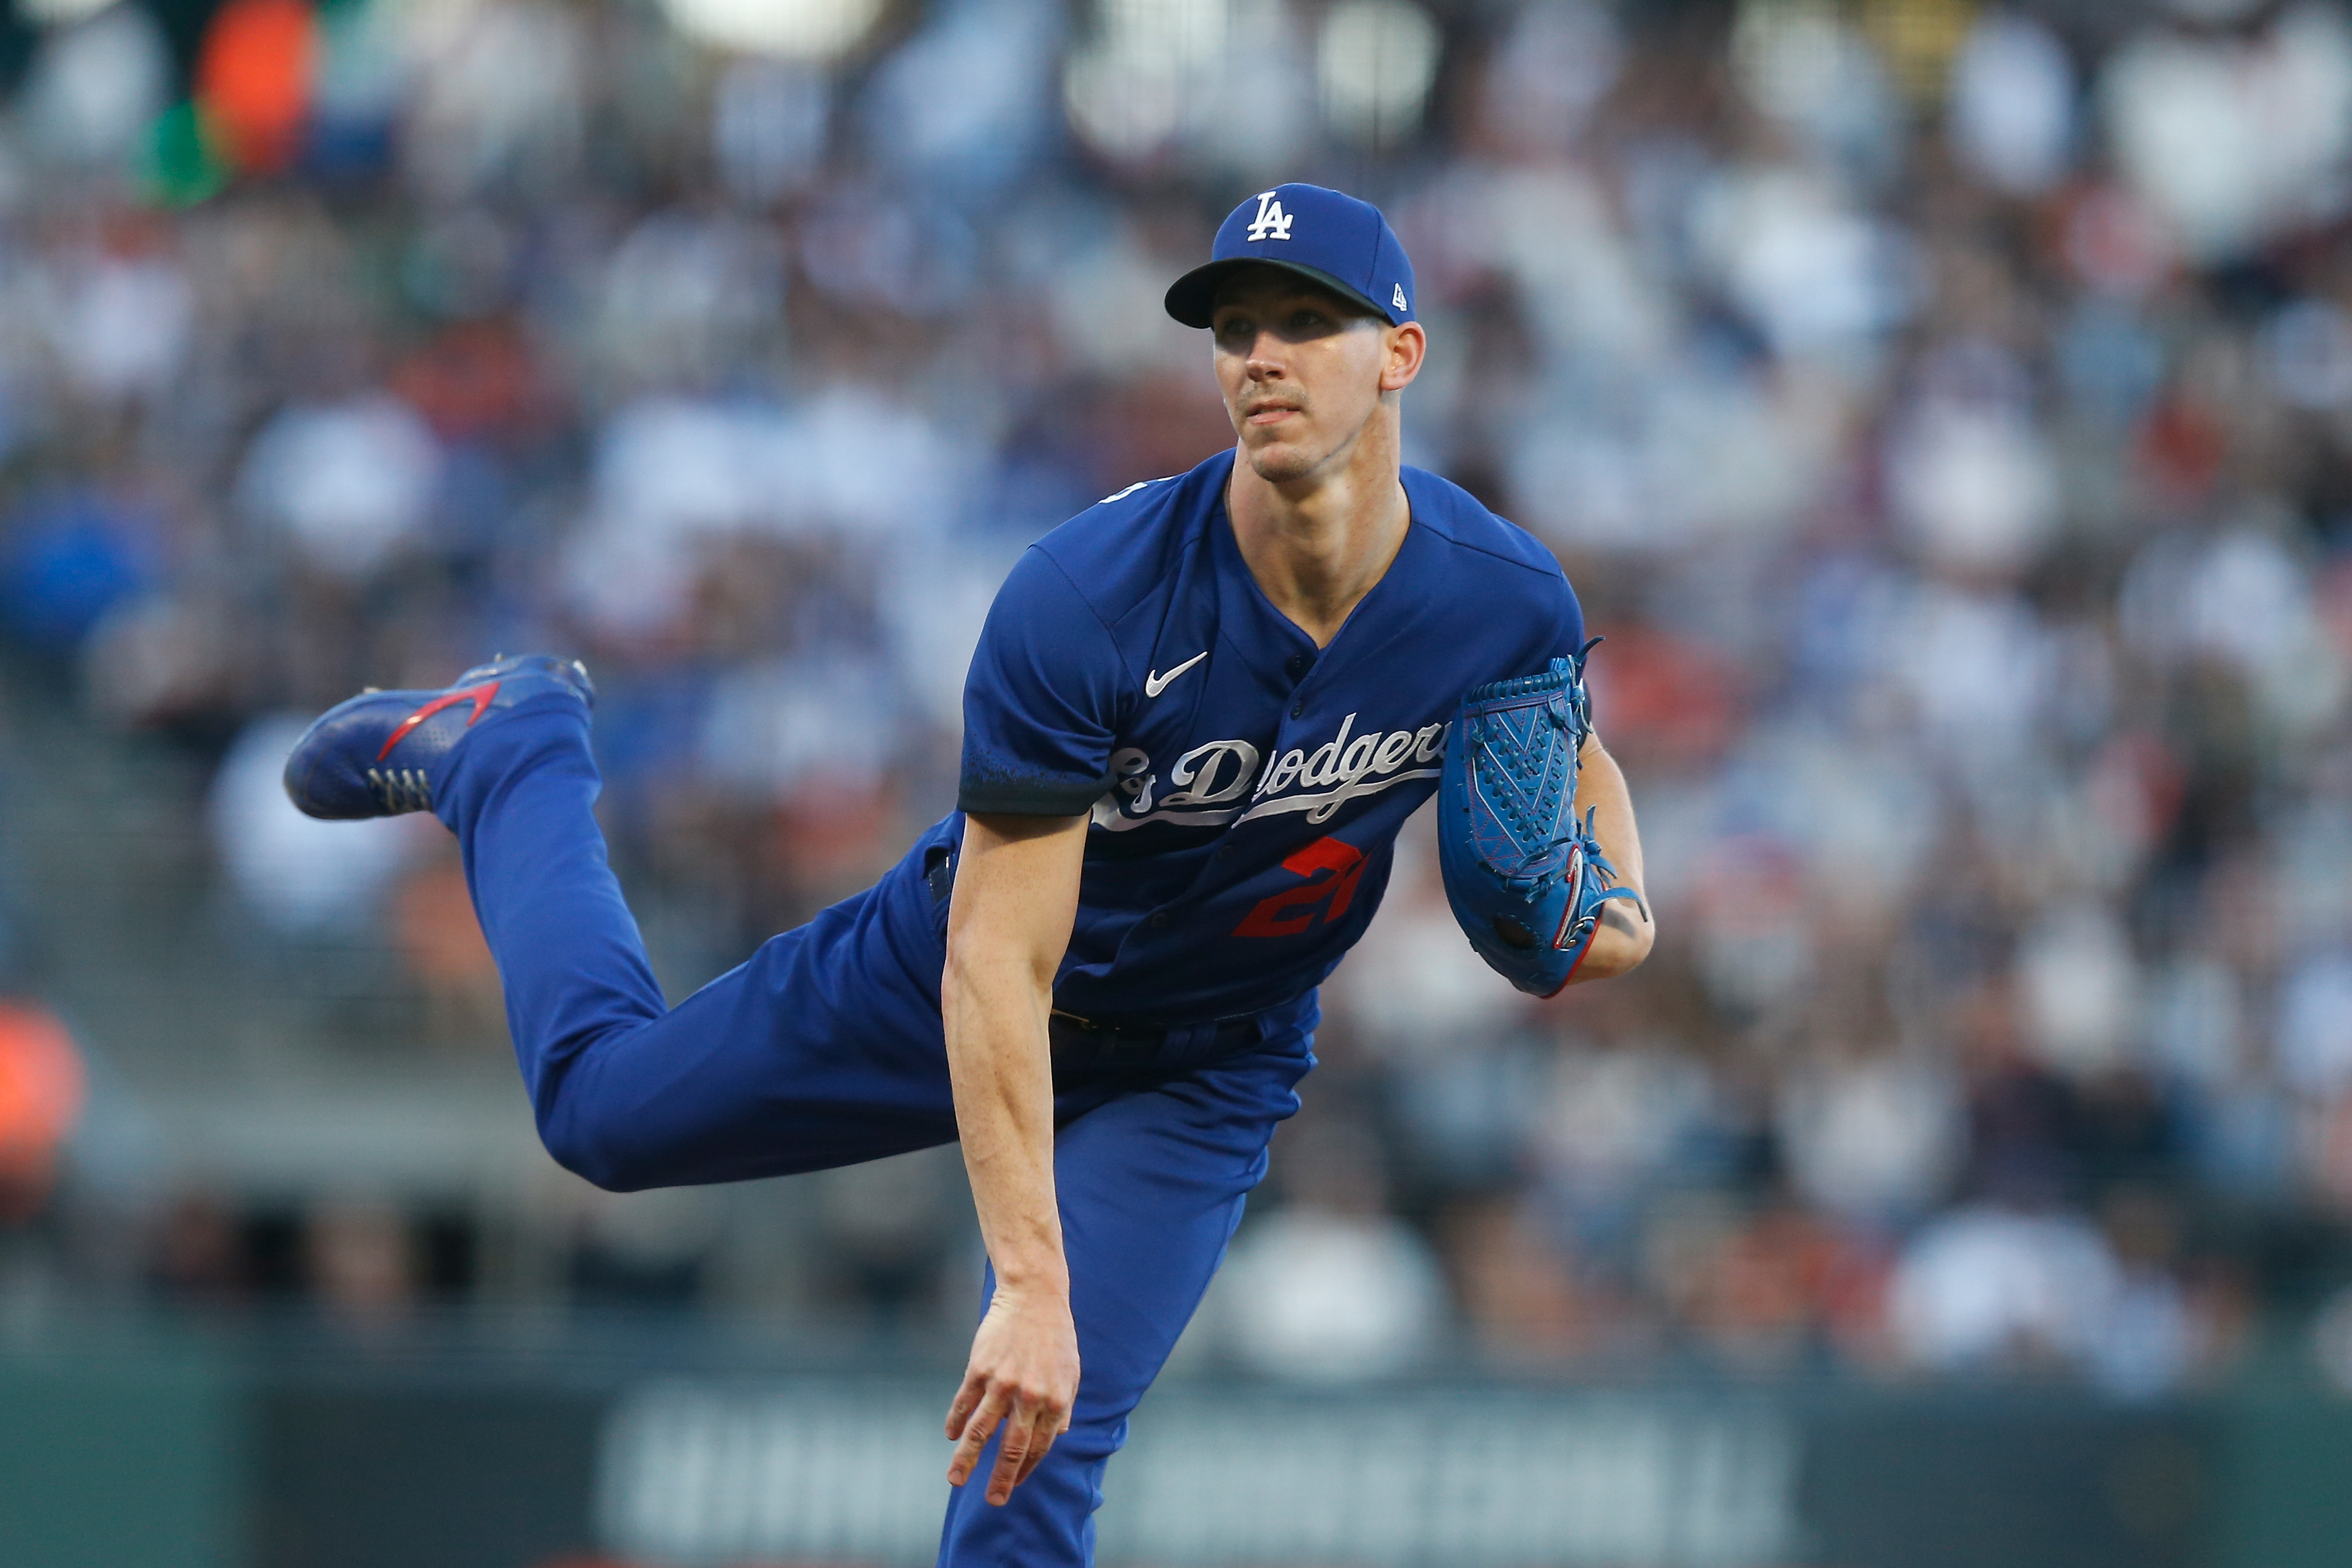 Walker Buehler #21 of the Los Angeles Dodgers pitches against the San Francisco Giants at Oracle Park on June 10, 2022 in San Francisco, California.